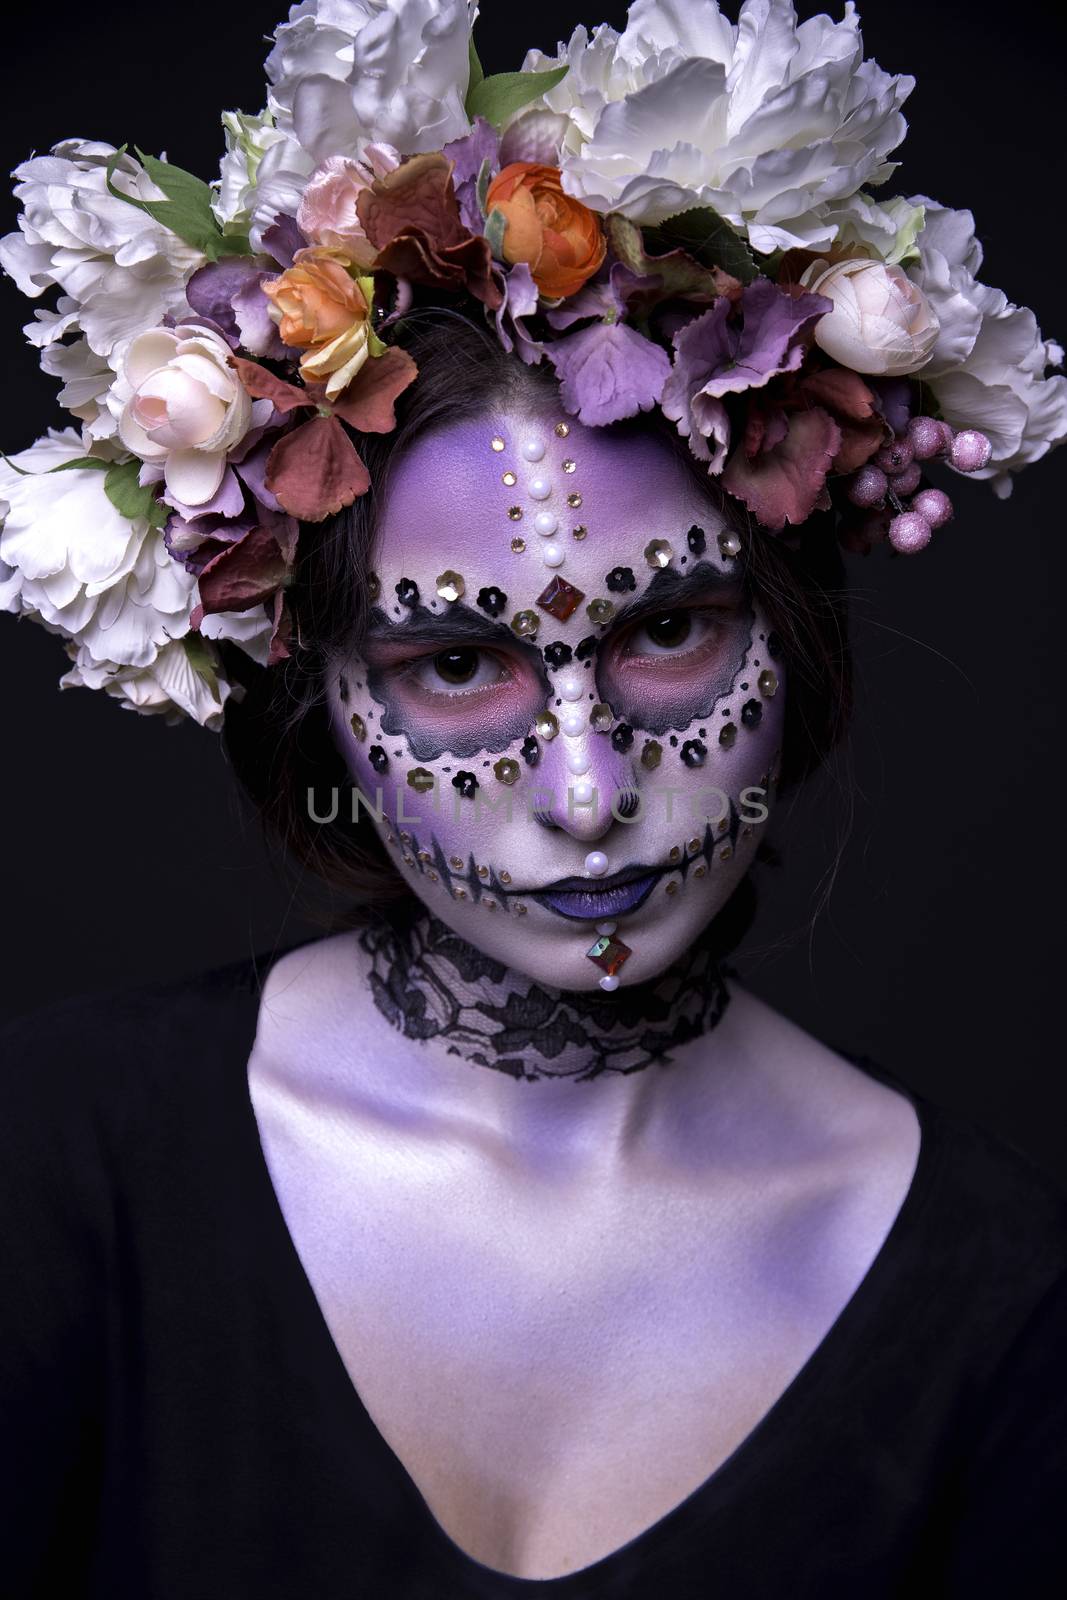 Halloween Girl with Rhinestones and Wreath of Flowers by Multipedia